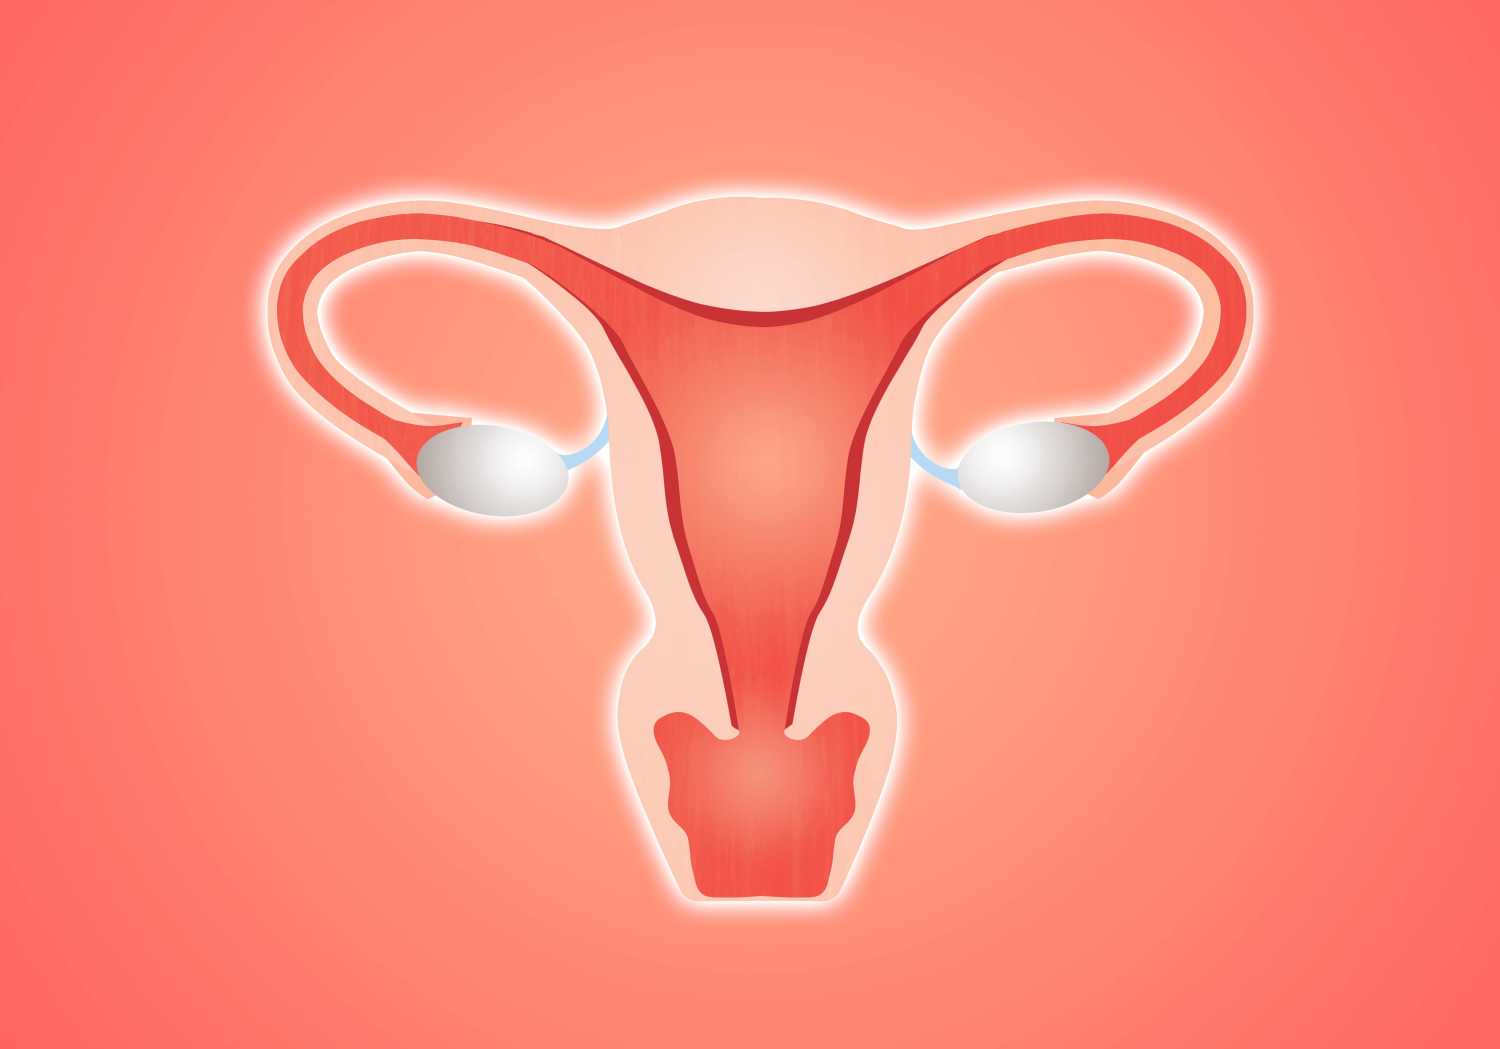 Illustration of ovaries to highlight shrinking ovarian cysts naturally